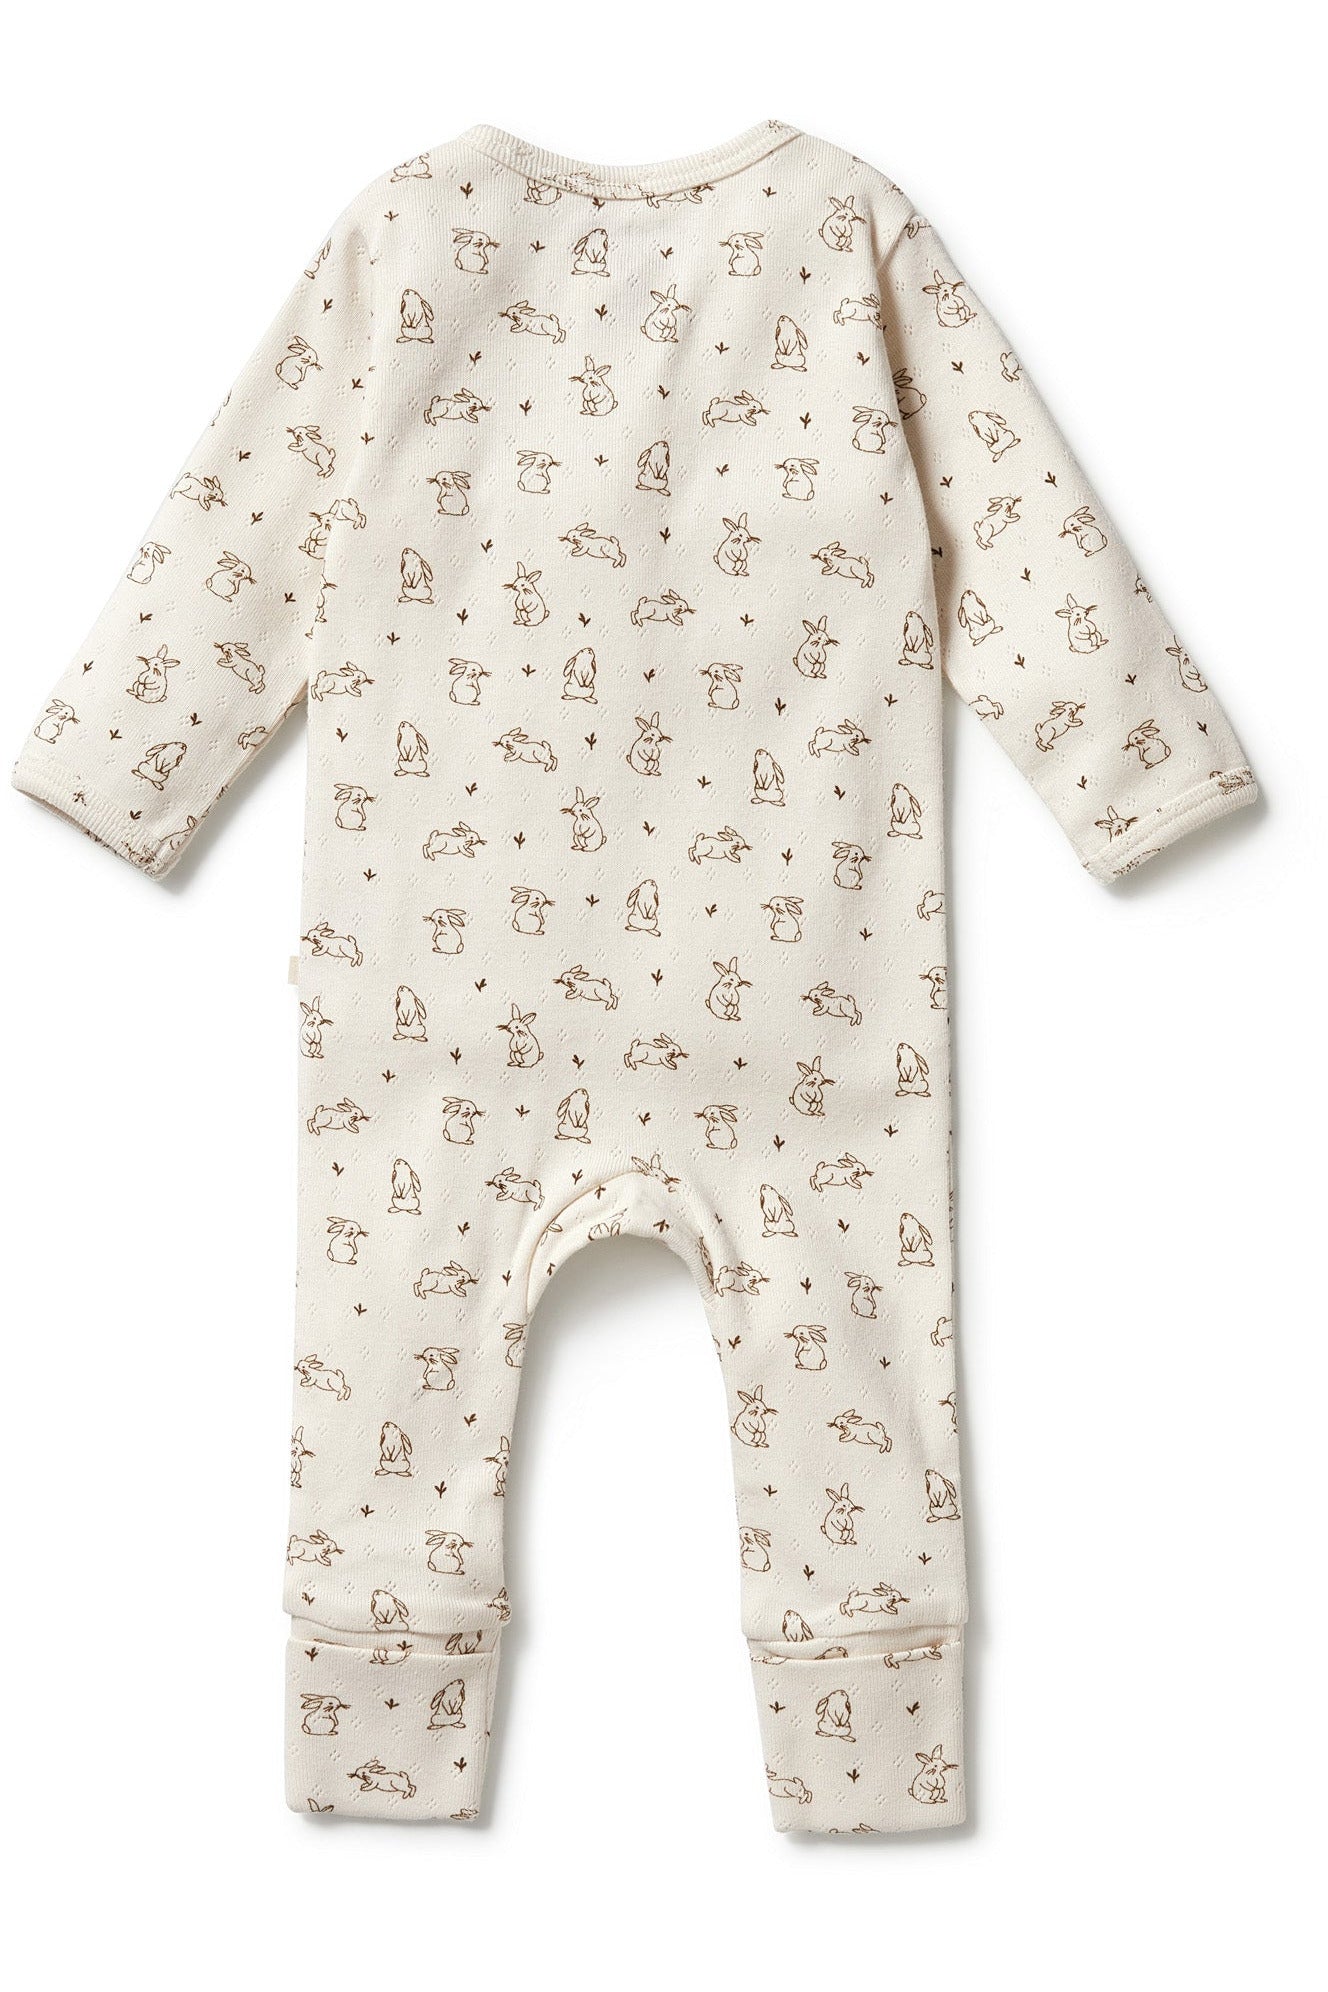 Organic Pointelle Zipsuit with Feet - Bunny Love